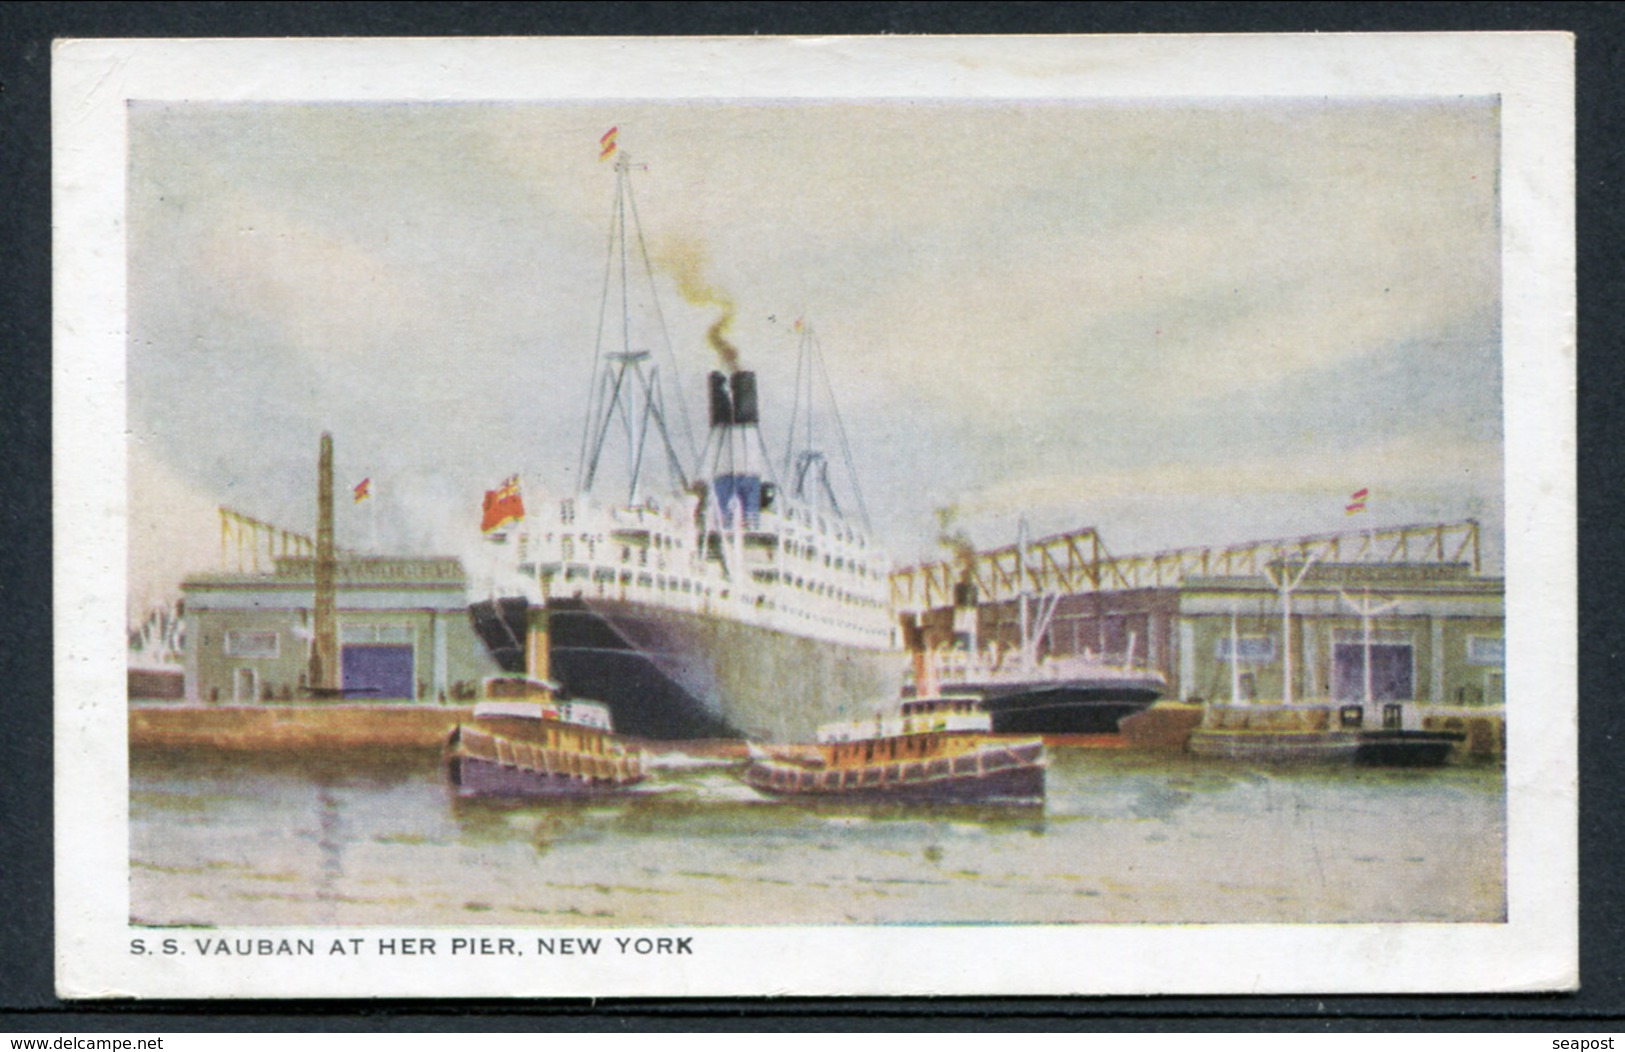 C1908 LAMPORT AND HOLT LINE -- "VAUBAN" AT HER PIER NEW YORK - Steamers